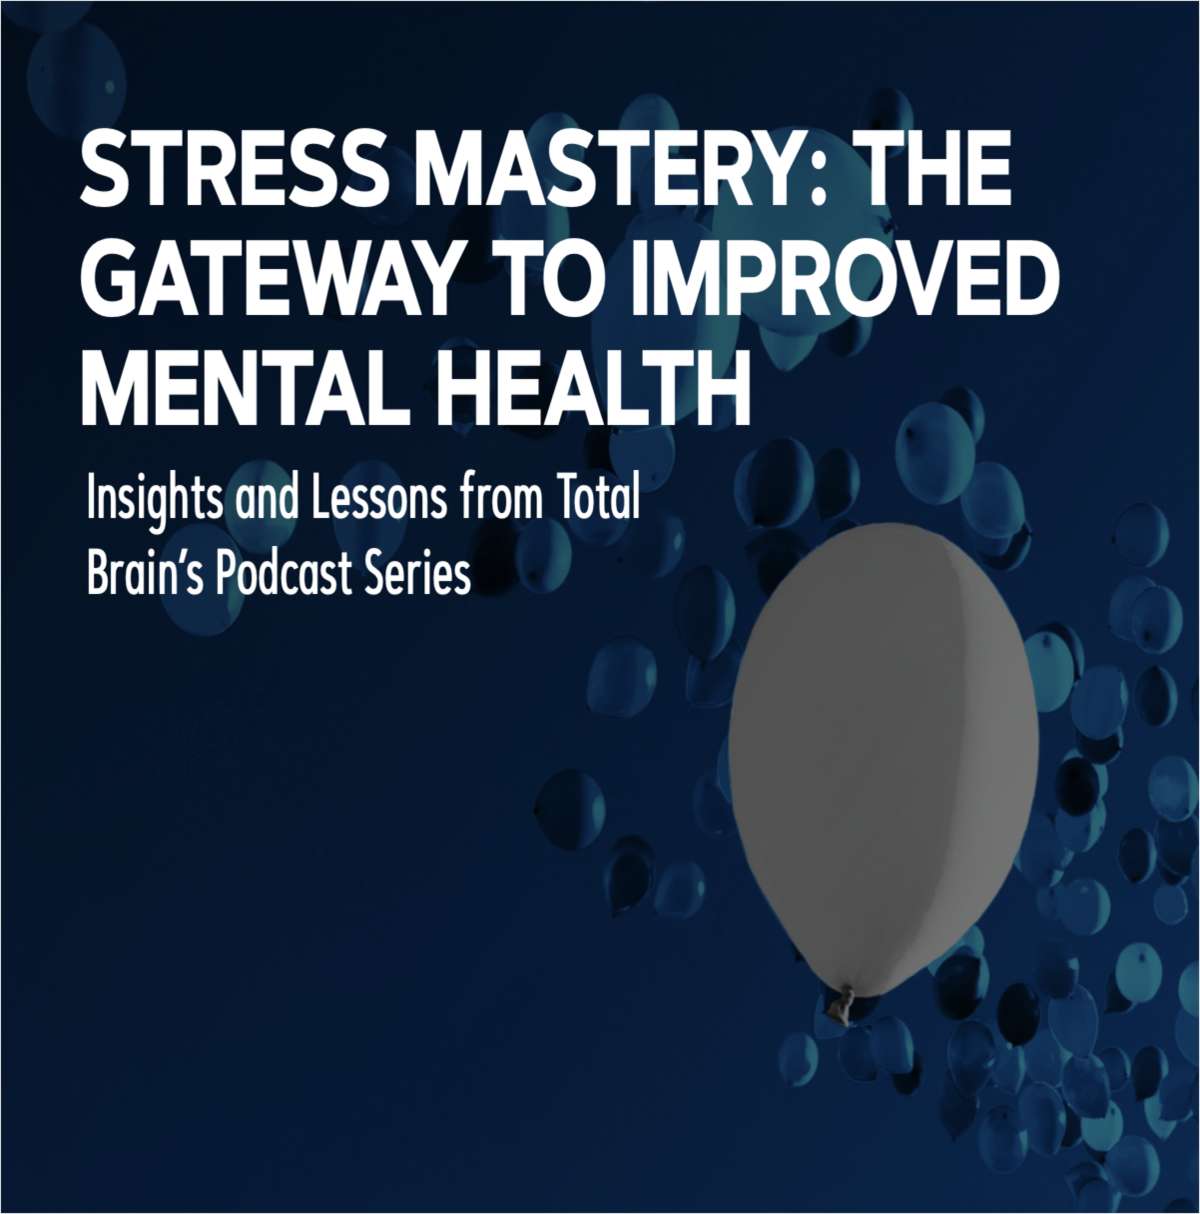 Stress Mastery: The Gateway to Improved Mental Health